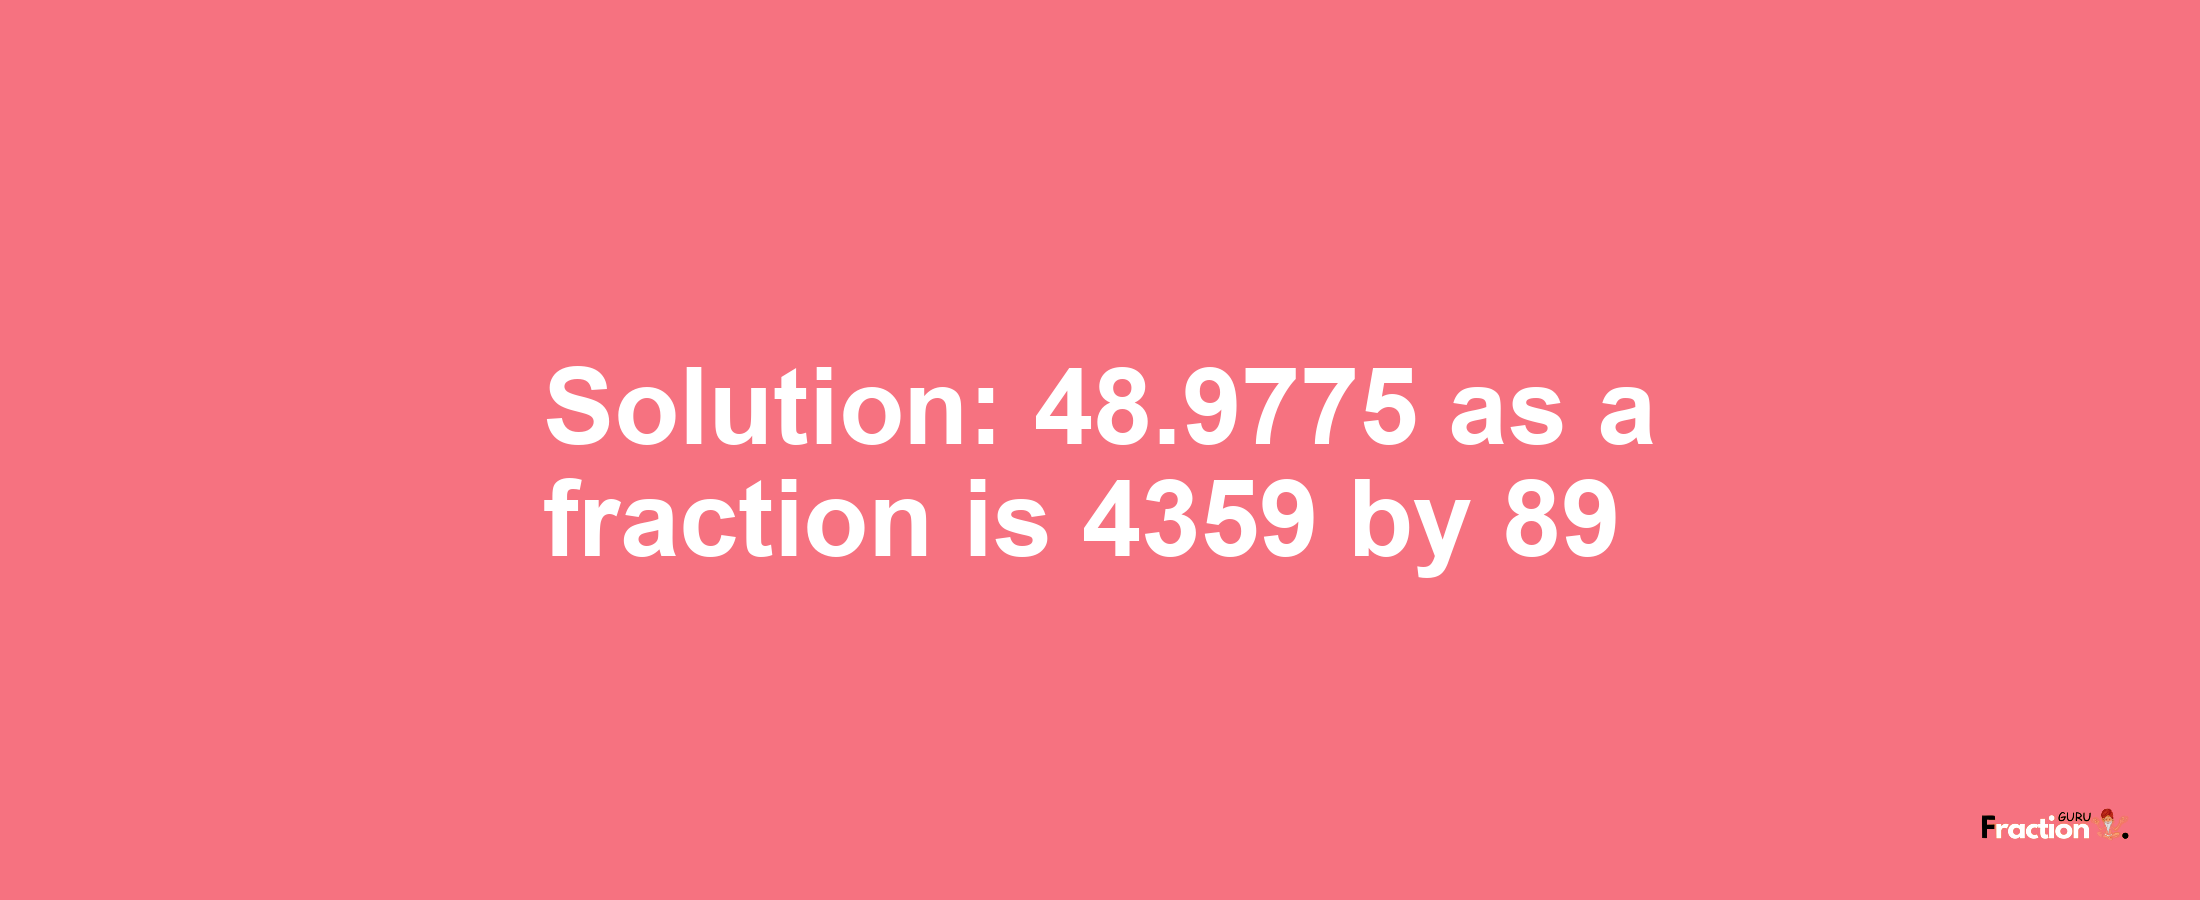 Solution:48.9775 as a fraction is 4359/89